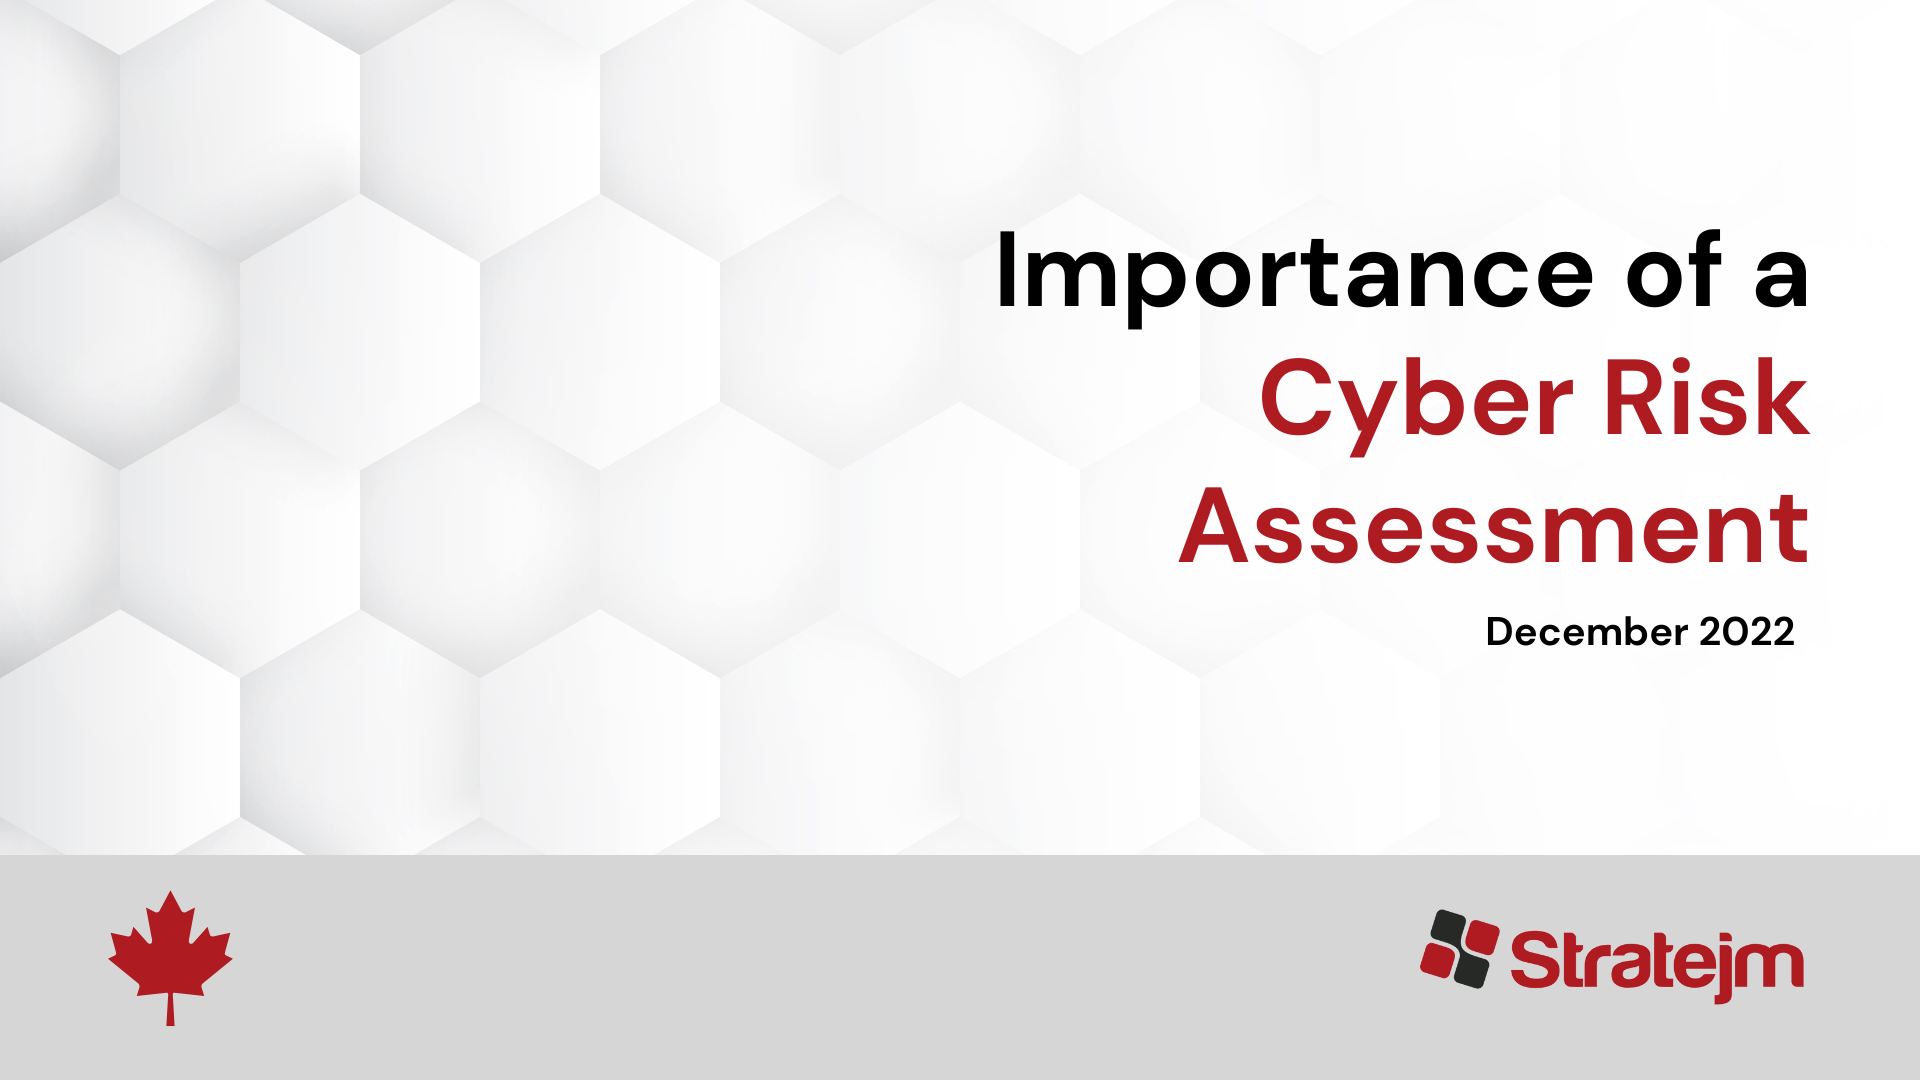 Learn why it is important to conduct cybersecurity risk assessments